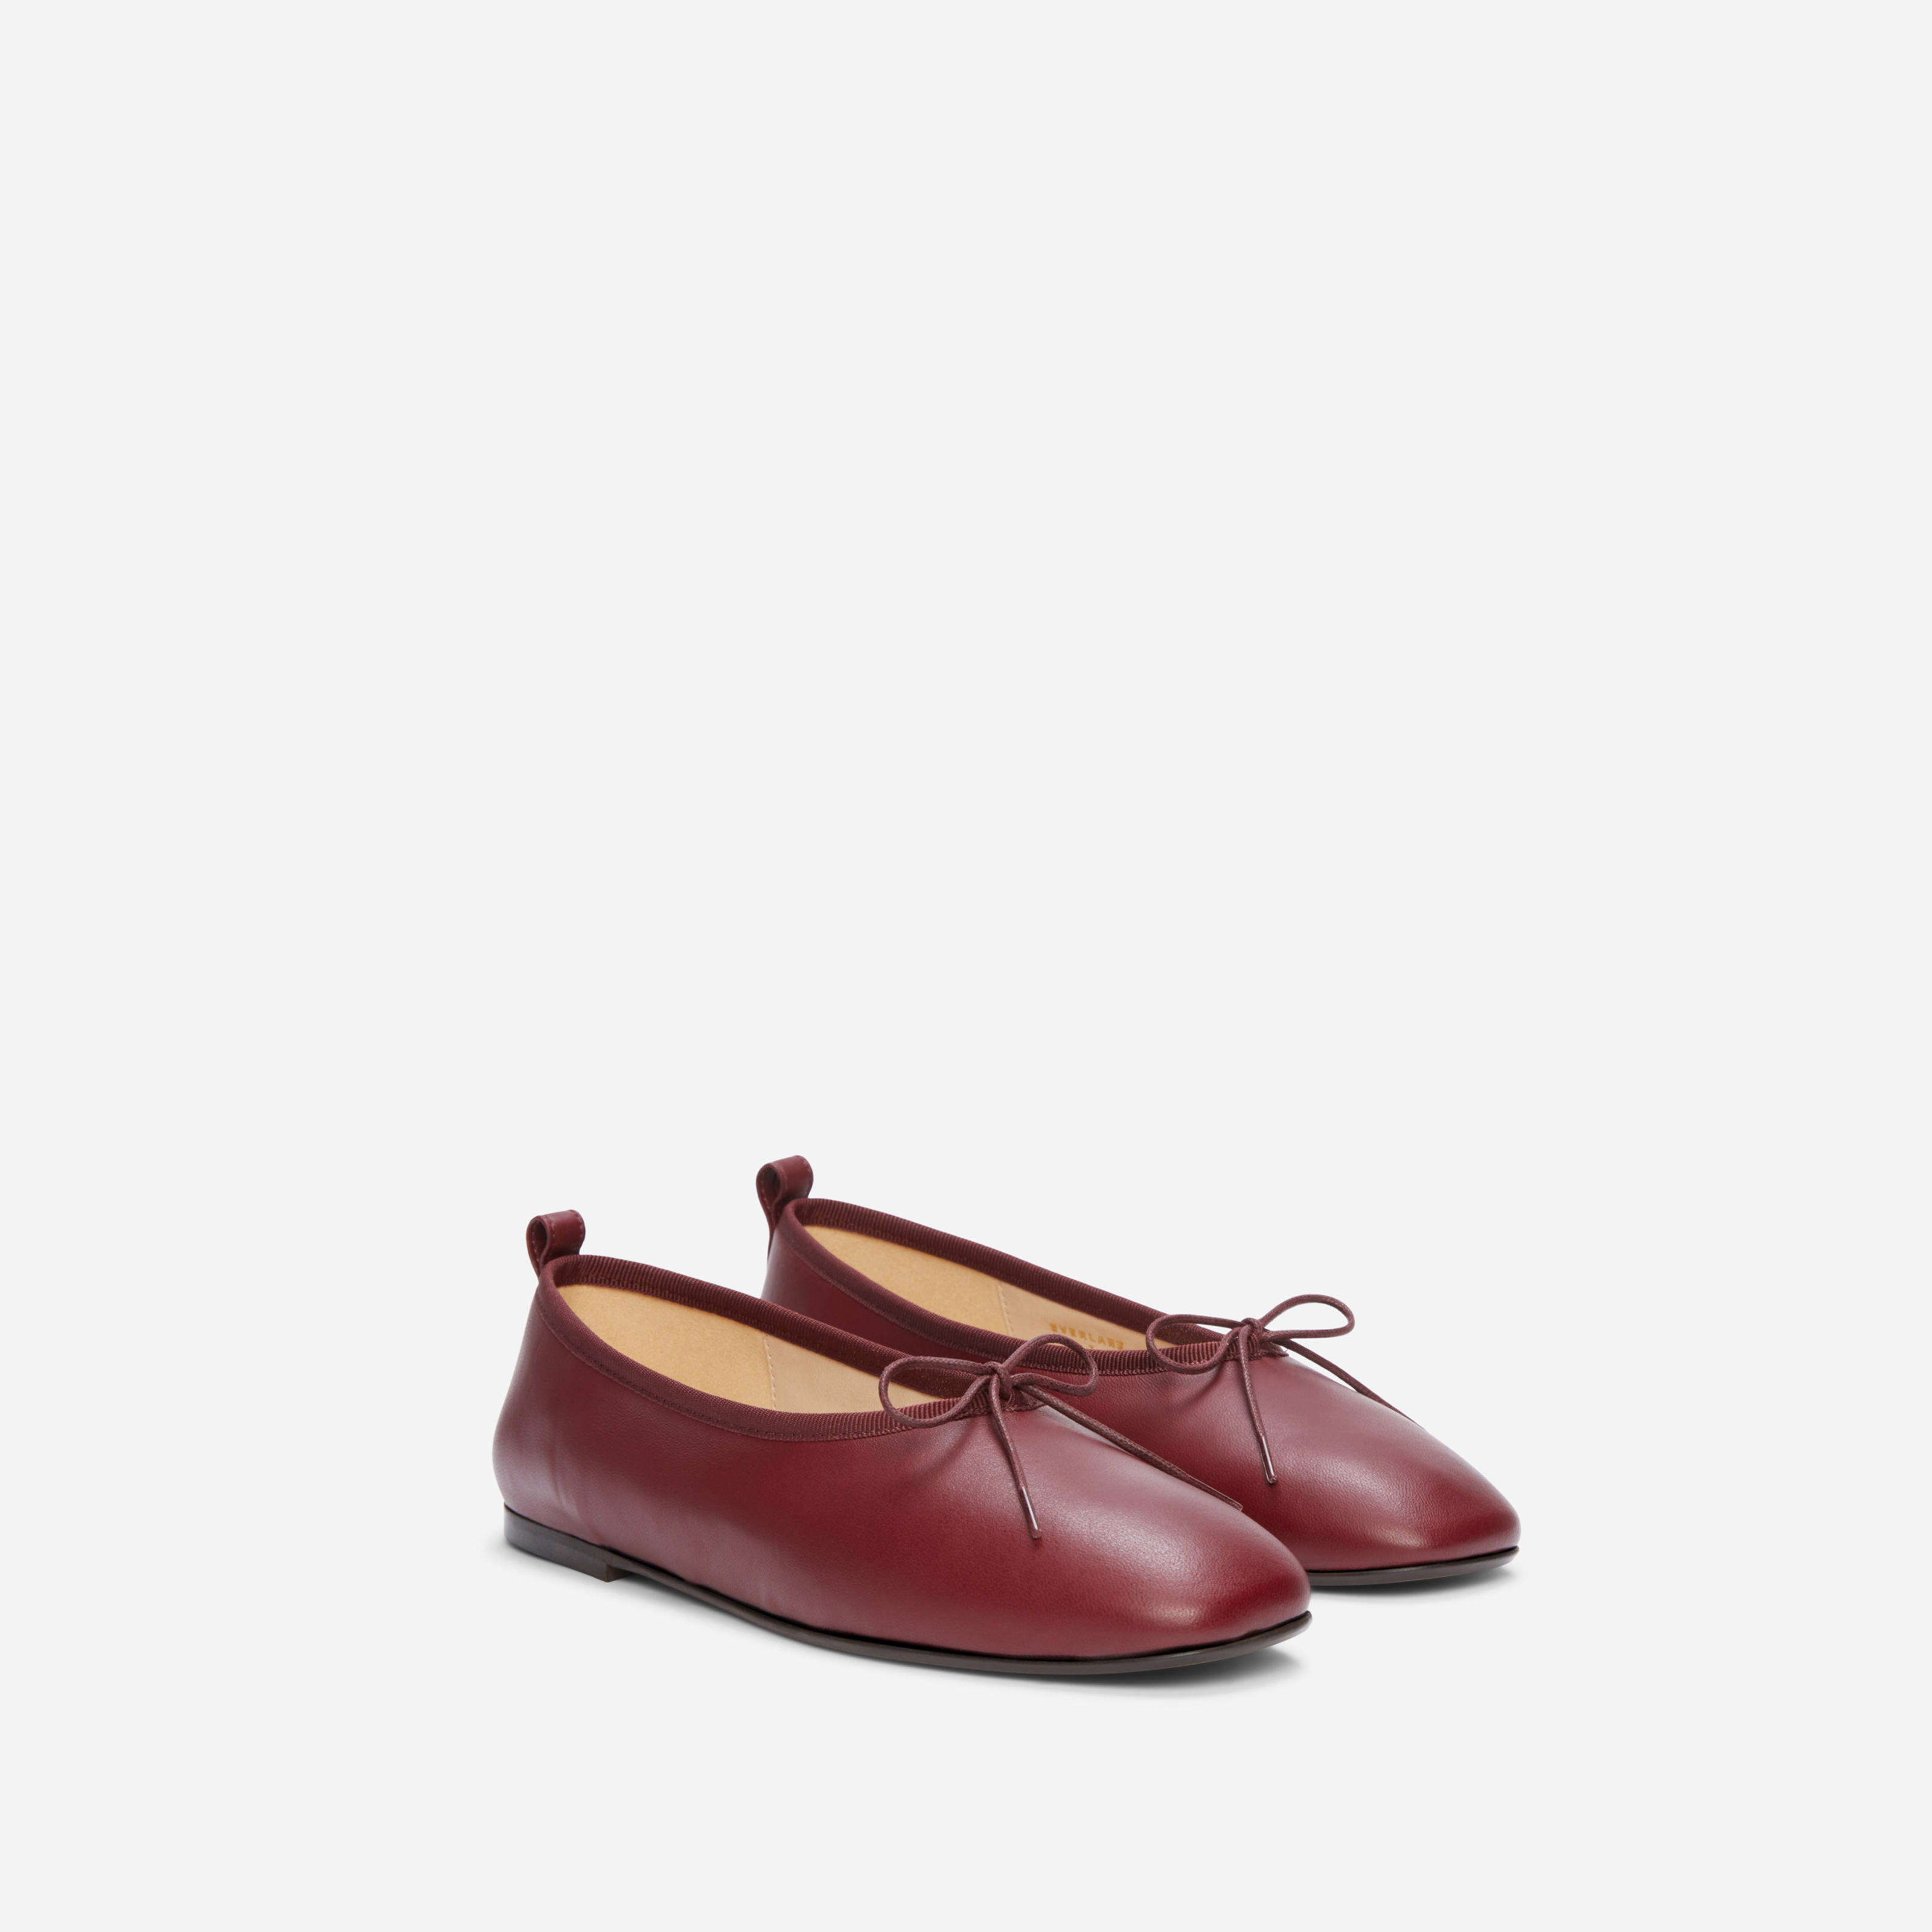 Italian Leather Day Ballet Flat by Everlane in Andorra, Size 10